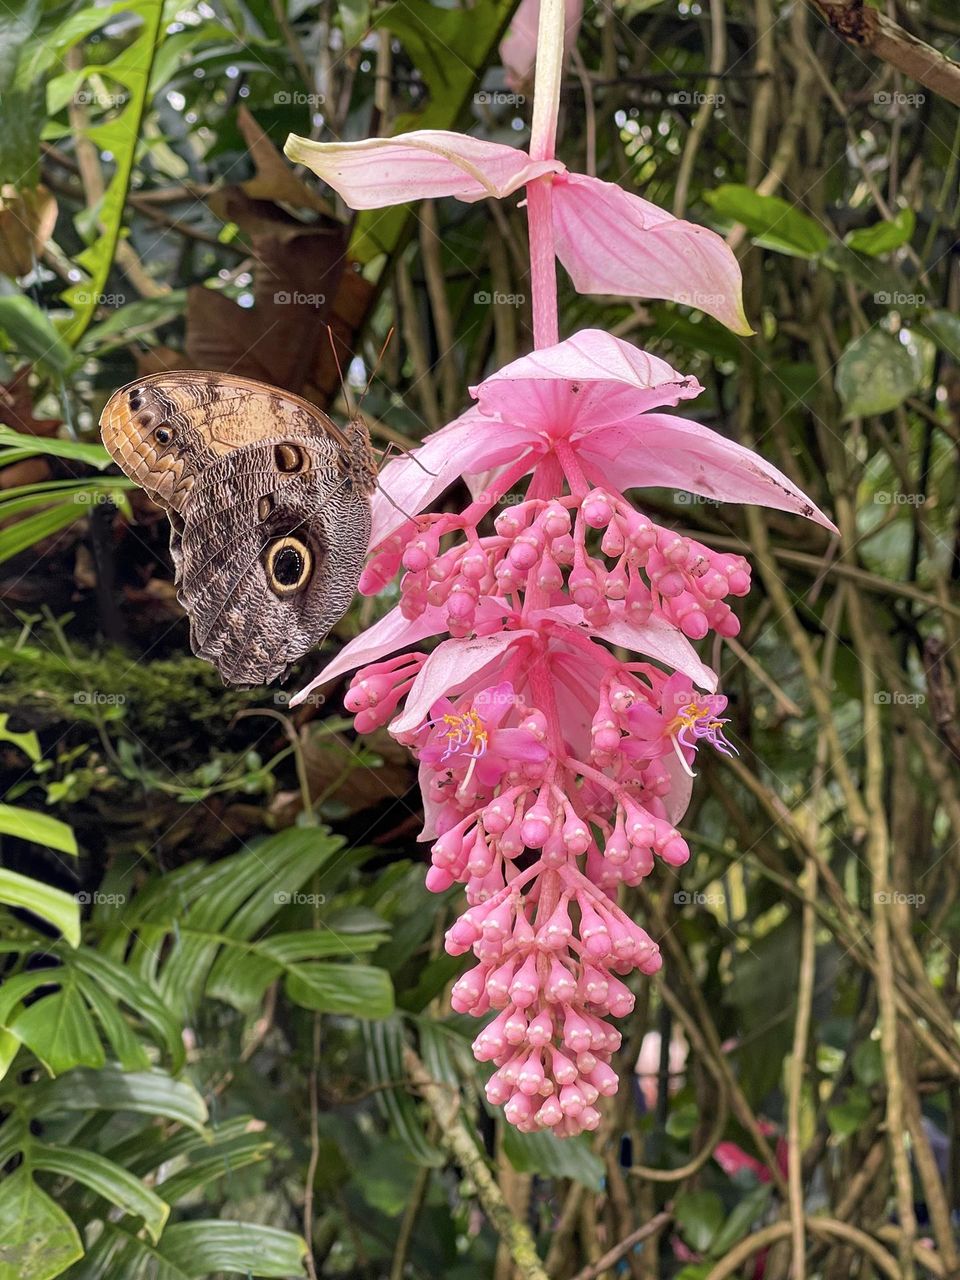 Big tropical flower with butterfly on it